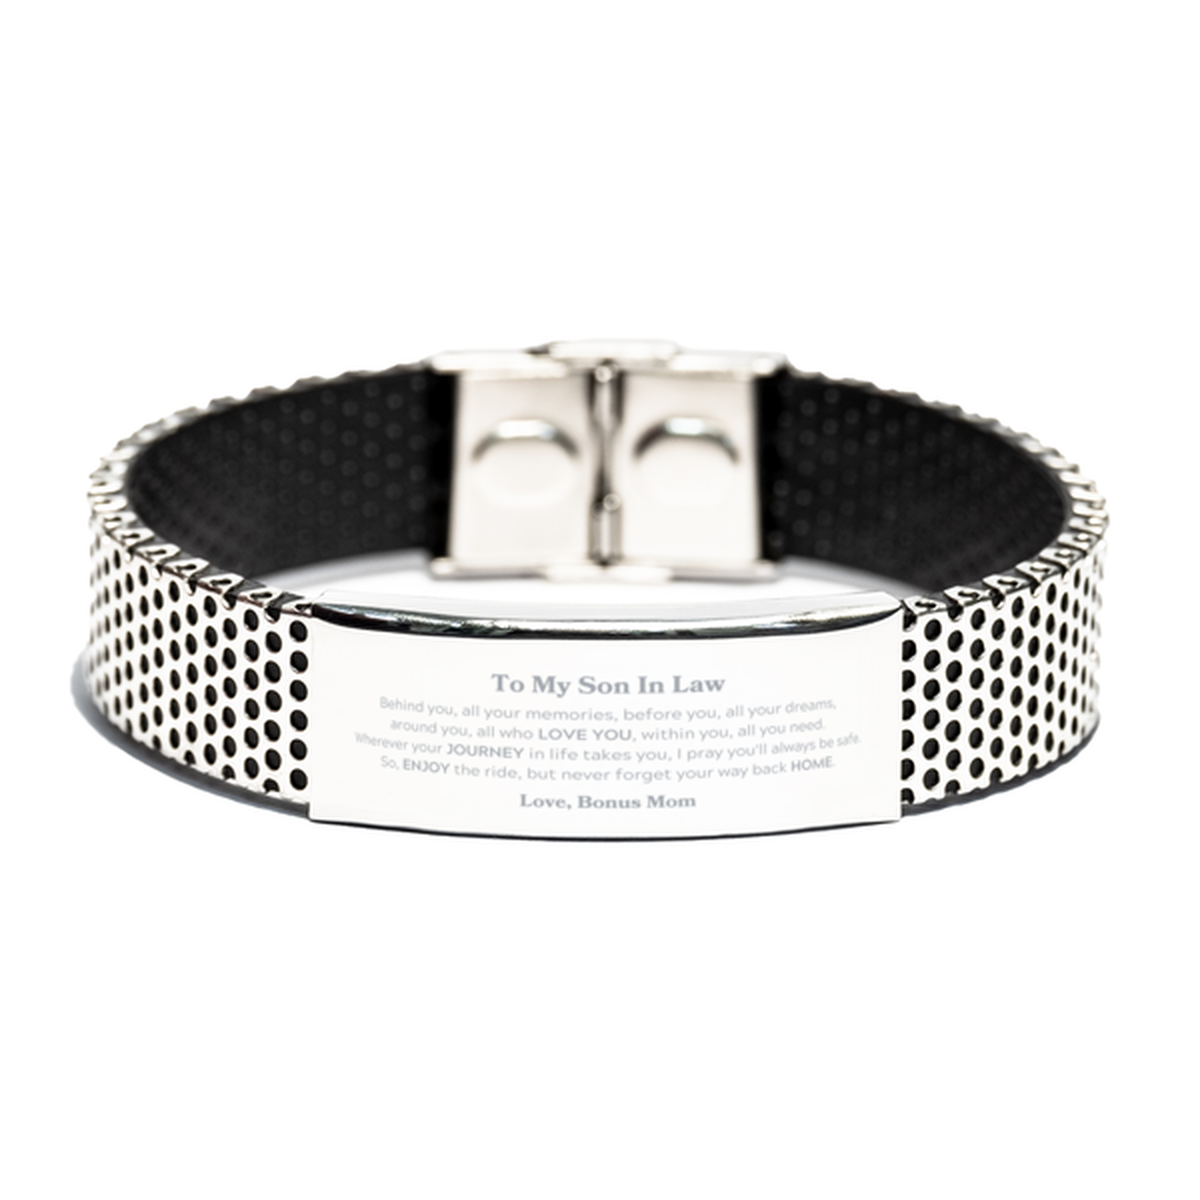 To My Son In Law Graduation Gifts from Bonus Mom, Son In Law Stainless Steel Bracelet Christmas Birthday Gifts for Son In Law Behind you, all your memories, before you, all your dreams. Love, Bonus Mom